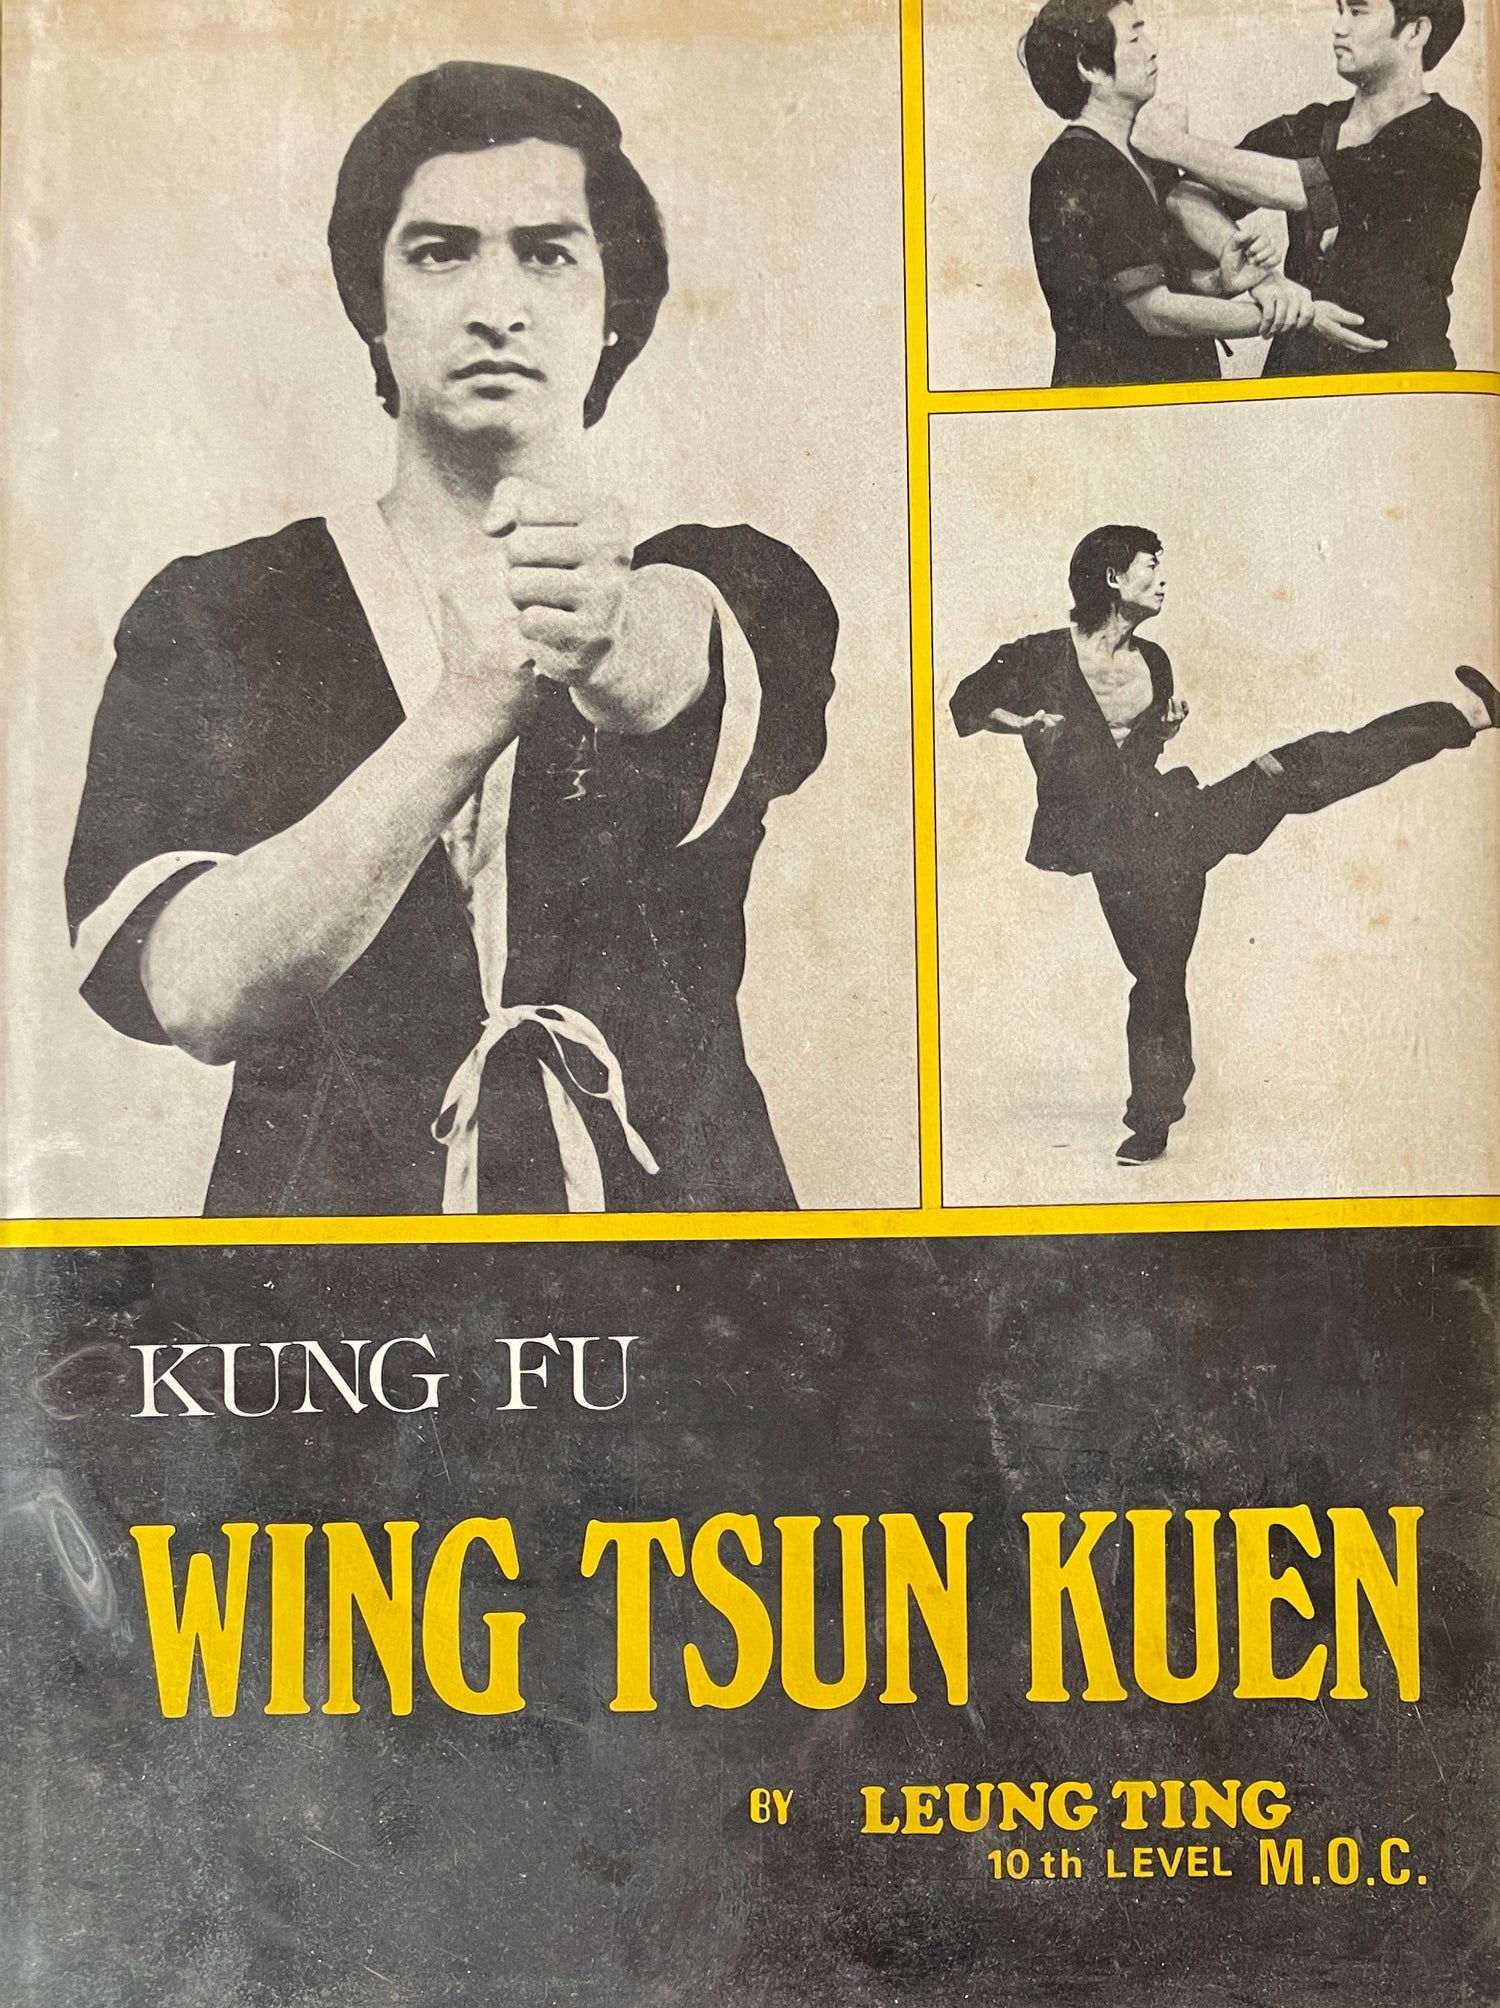 Kung Fu Wing Tsun Kuen Book by Leung Ting (Hardcover) (Preowned)